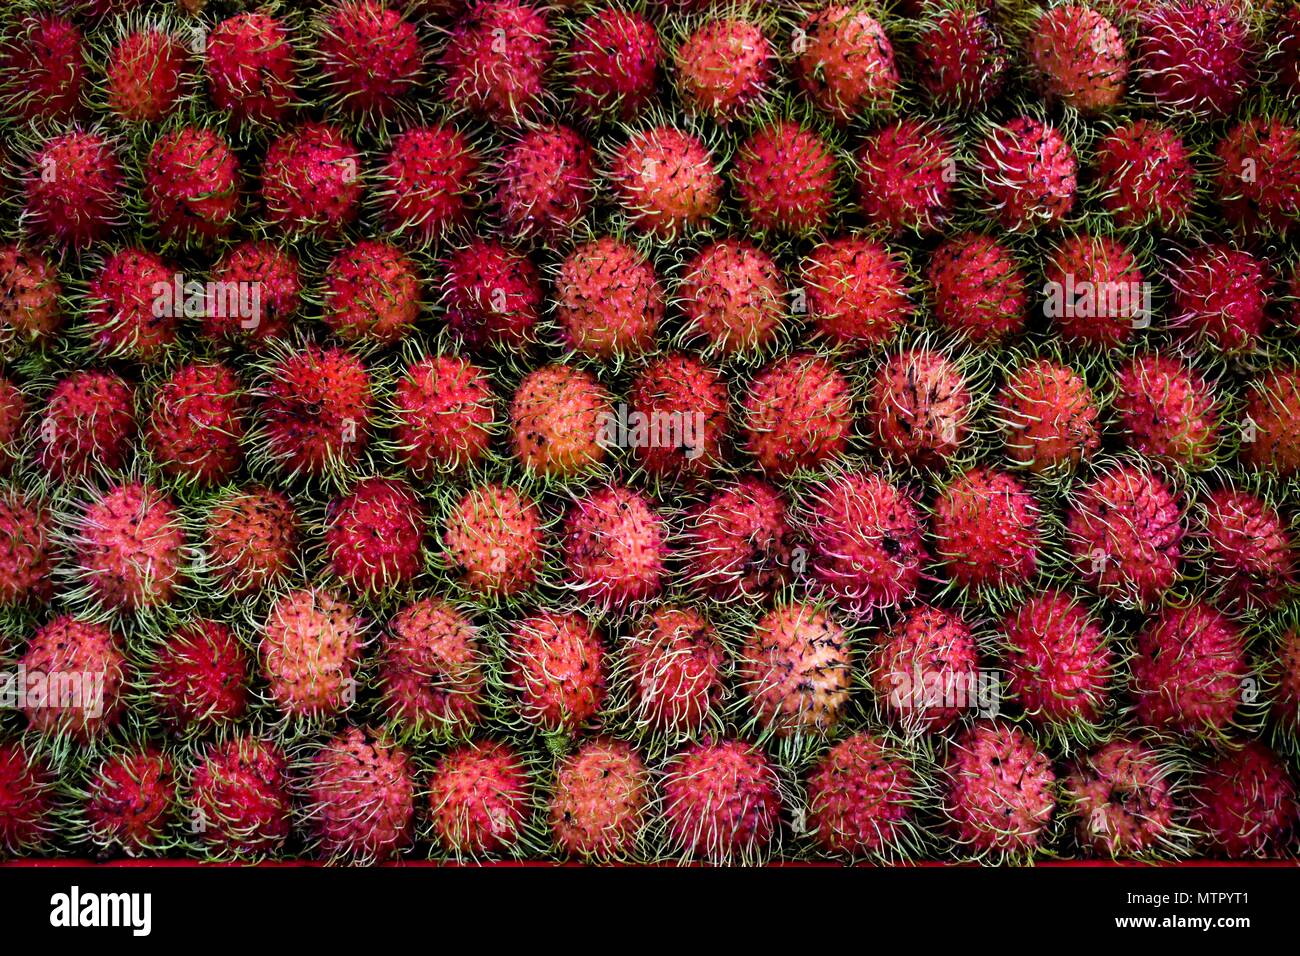 A pile of fresh rambutans on sale at a market in Thailand Stock Photo